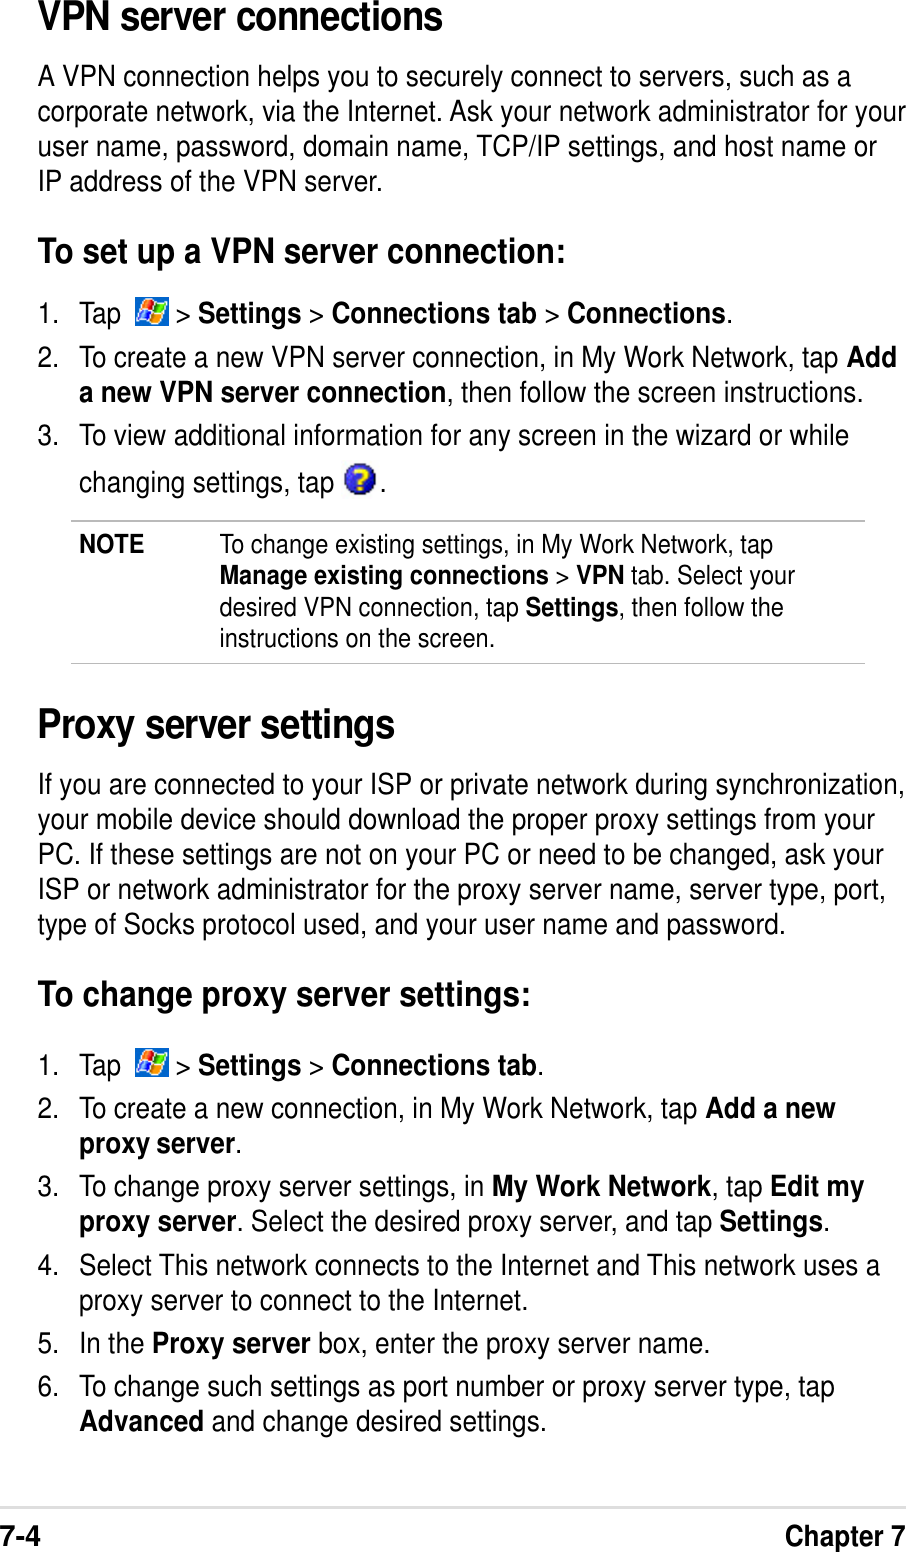 7-4Chapter 7VPN server connectionsA VPN connection helps you to securely connect to servers, such as acorporate network, via the Internet. Ask your network administrator for youruser name, password, domain name, TCP/IP settings, and host name orIP address of the VPN server.To set up a VPN server connection:1. Tap    &gt; Settings &gt; Connections tab &gt; Connections.2. To create a new VPN server connection, in My Work Network, tap Adda new VPN server connection, then follow the screen instructions.3. To view additional information for any screen in the wizard or whilechanging settings, tap  .NOTE To change existing settings, in My Work Network, tapManage existing connections &gt; VPN tab. Select yourdesired VPN connection, tap Settings, then follow theinstructions on the screen.Proxy server settingsIf you are connected to your ISP or private network during synchronization,your mobile device should download the proper proxy settings from yourPC. If these settings are not on your PC or need to be changed, ask yourISP or network administrator for the proxy server name, server type, port,type of Socks protocol used, and your user name and password.To change proxy server settings:1. Tap    &gt; Settings &gt; Connections tab.2. To create a new connection, in My Work Network, tap Add a newproxy server.3. To change proxy server settings, in My Work Network, tap Edit myproxy server. Select the desired proxy server, and tap Settings.4. Select This network connects to the Internet and This network uses aproxy server to connect to the Internet.5. In the Proxy server box, enter the proxy server name.6. To change such settings as port number or proxy server type, tapAdvanced and change desired settings.